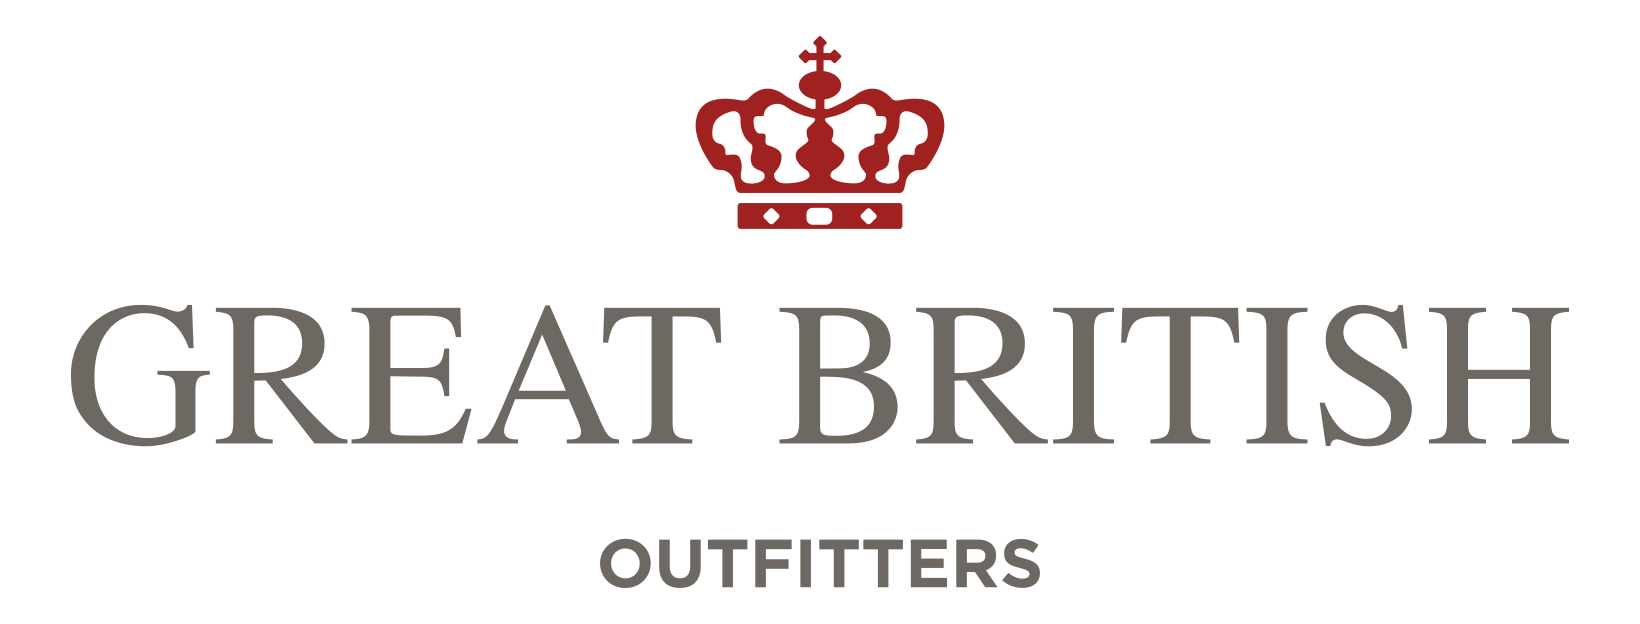 Great British Outfitters logo